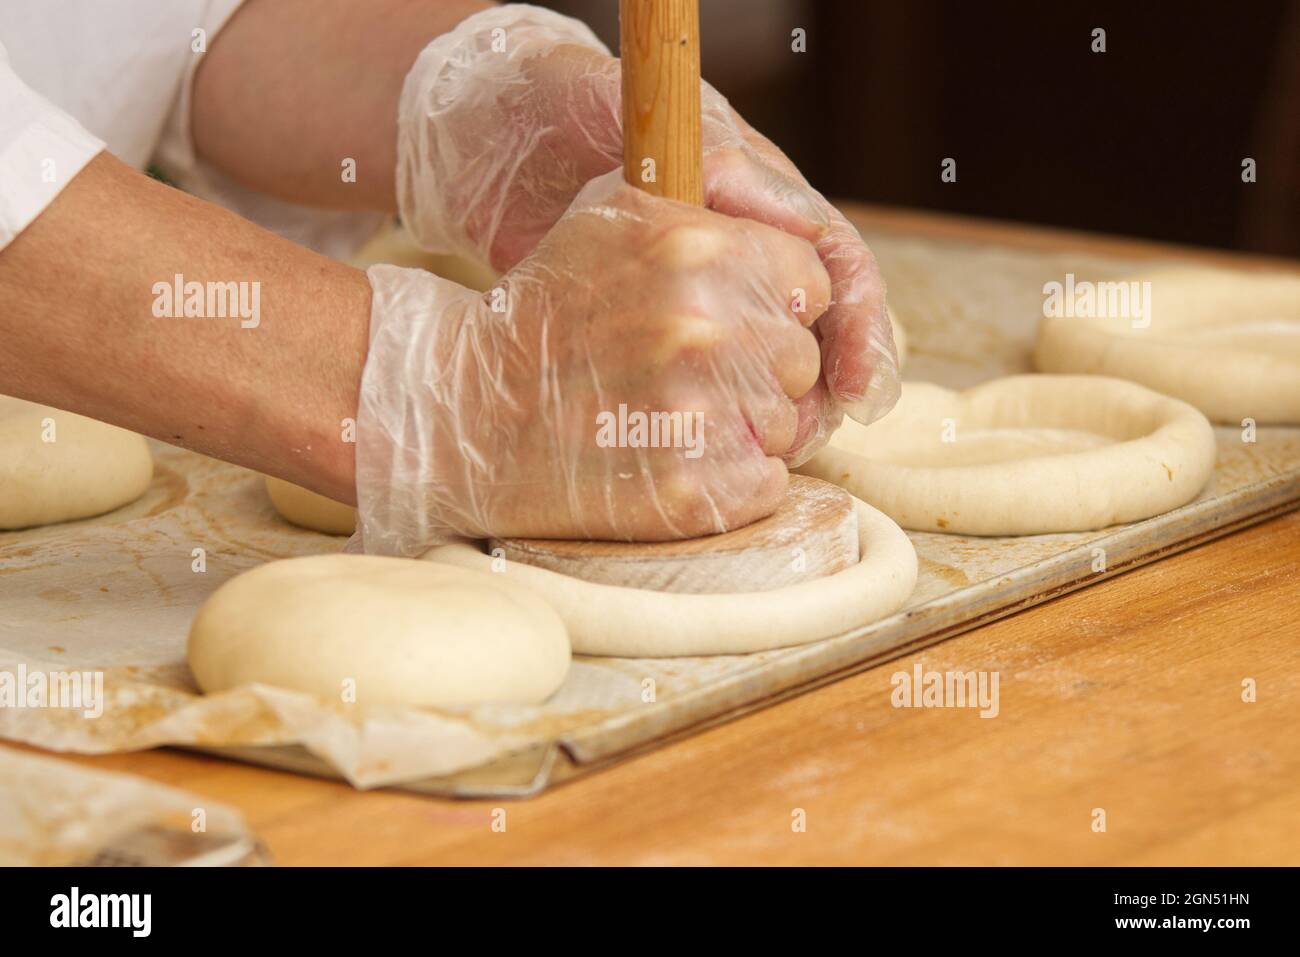 The woman in the picture is making filled pies. Hands in protective gloves holding the tool press dough to get the proper shape of pie. Work in the ba Stock Photo